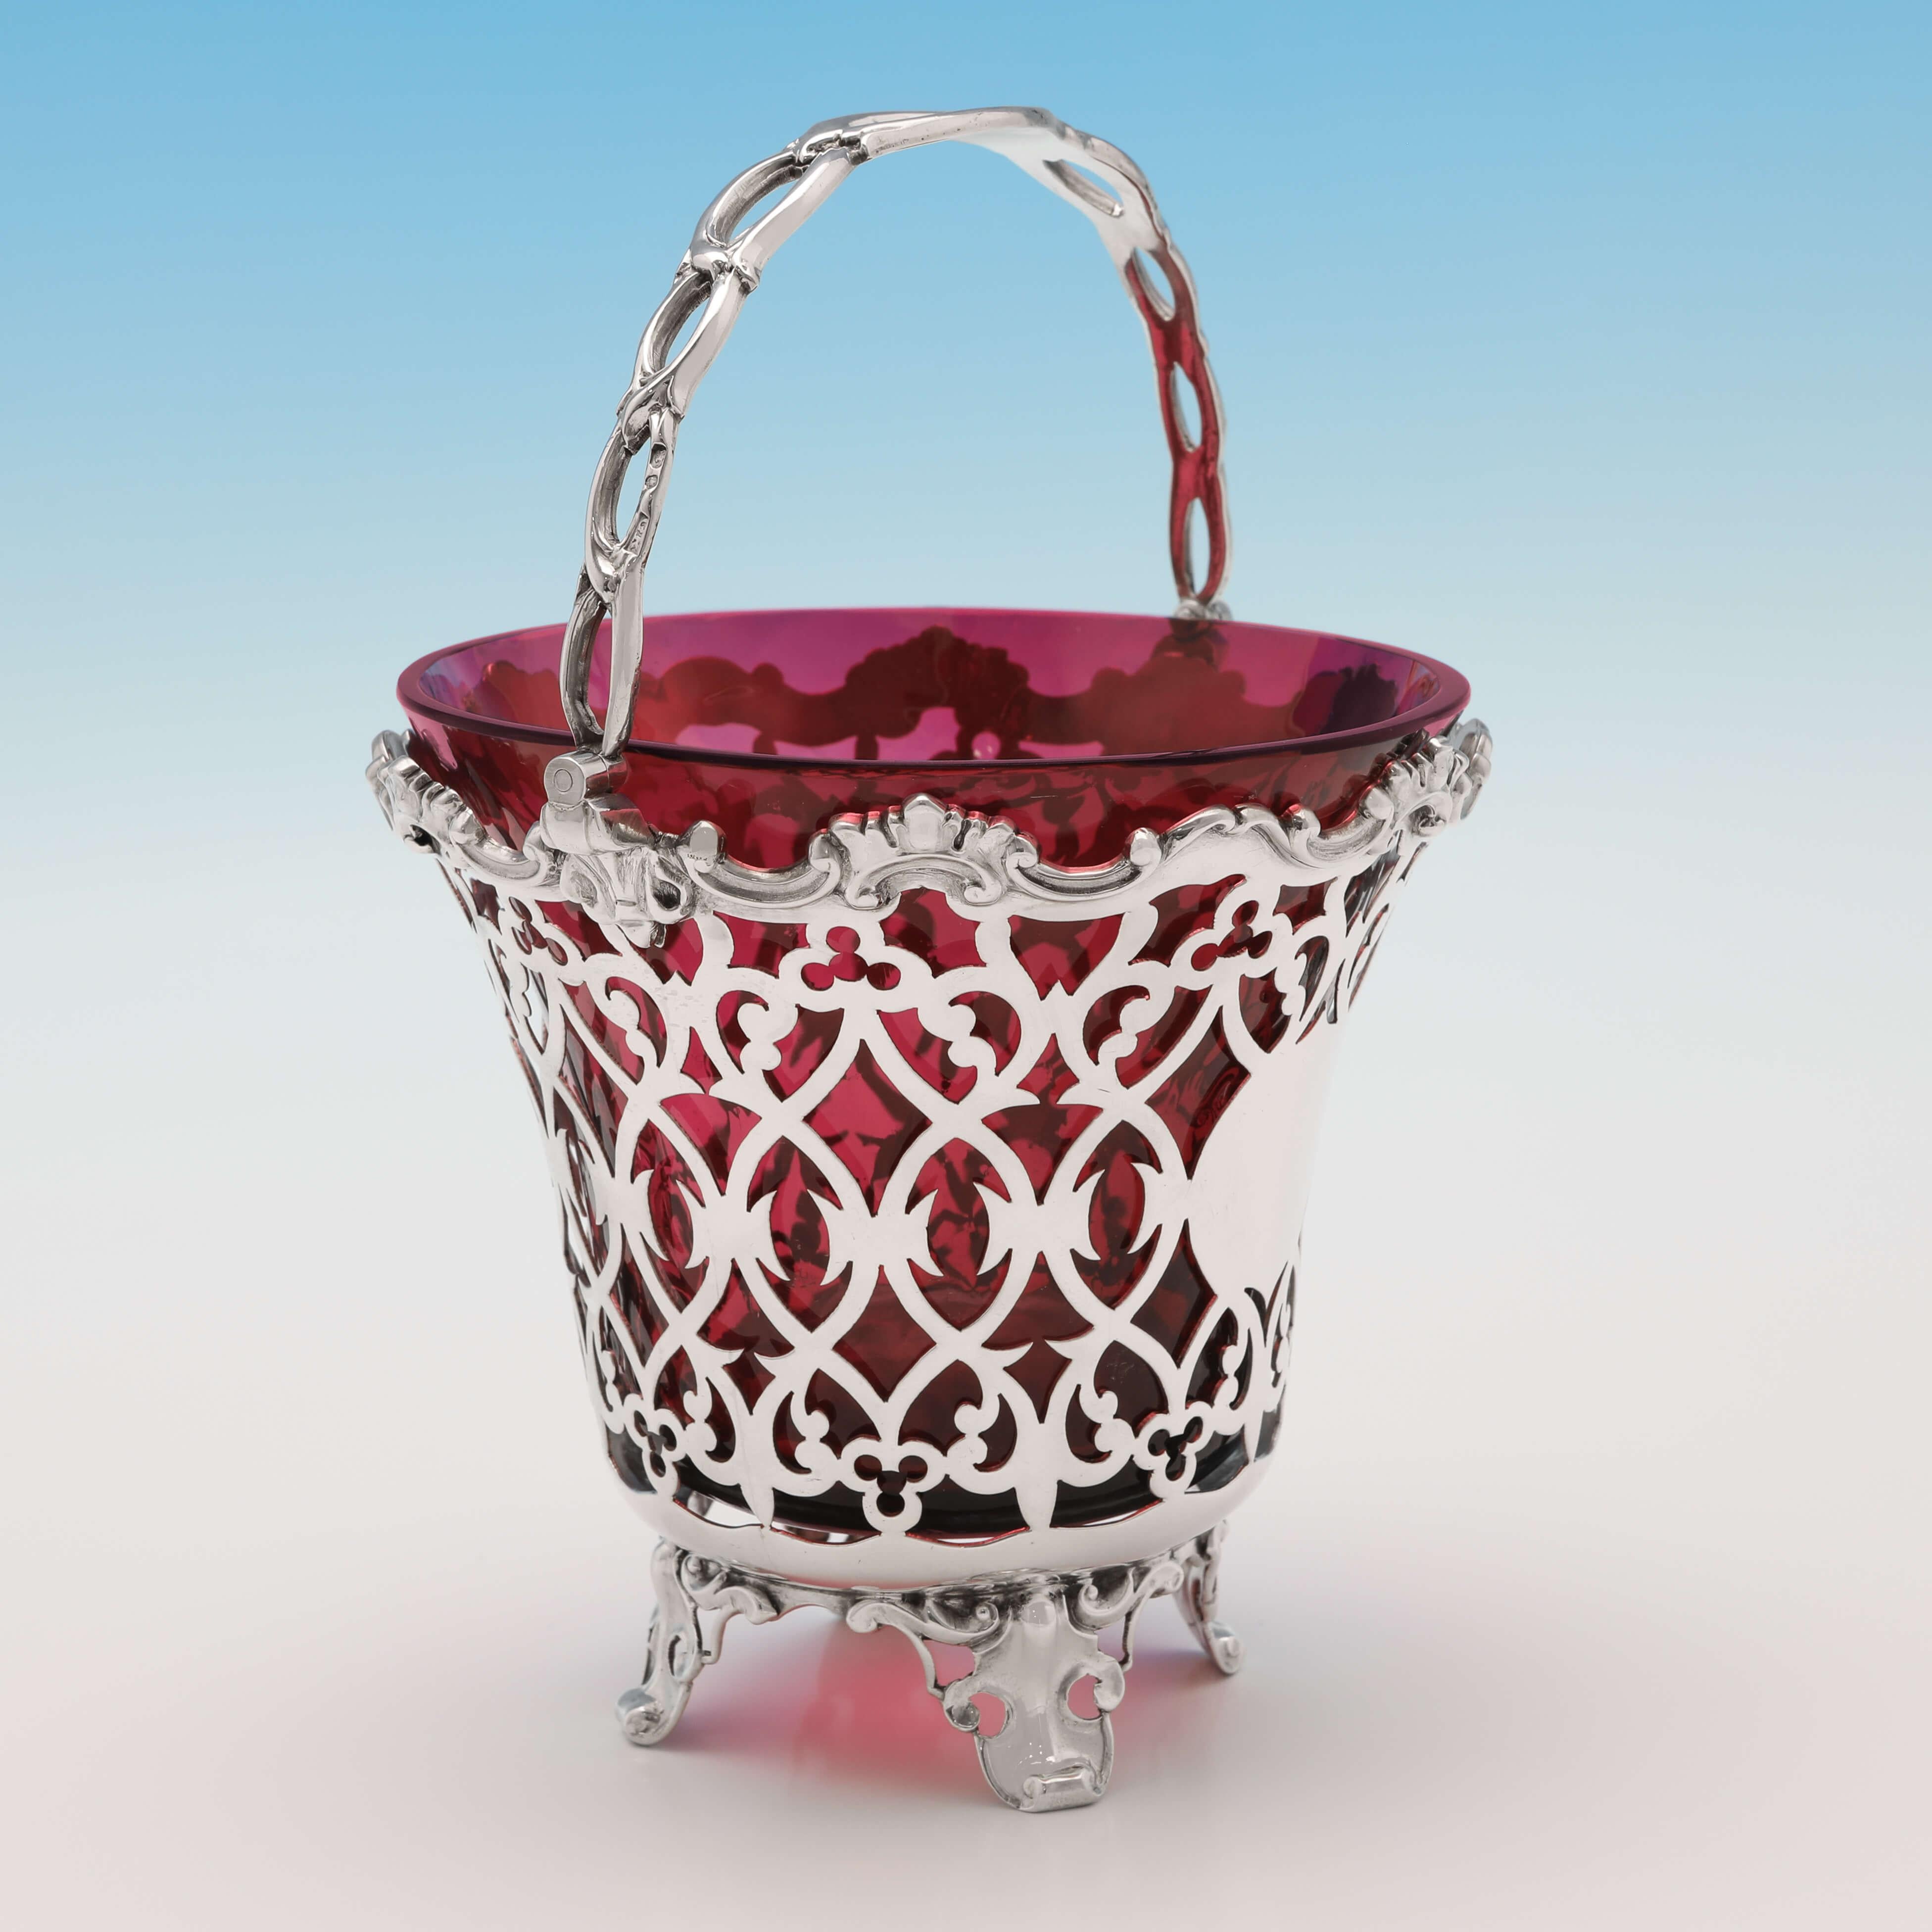 Hallmarked in London in 1856 by George Richards, this attractive, Victorian, Antique Sterling Silver Sugar Basket, features a ruby glass liner, and ornate pierced decoration to the body. The sugar basket measures 7